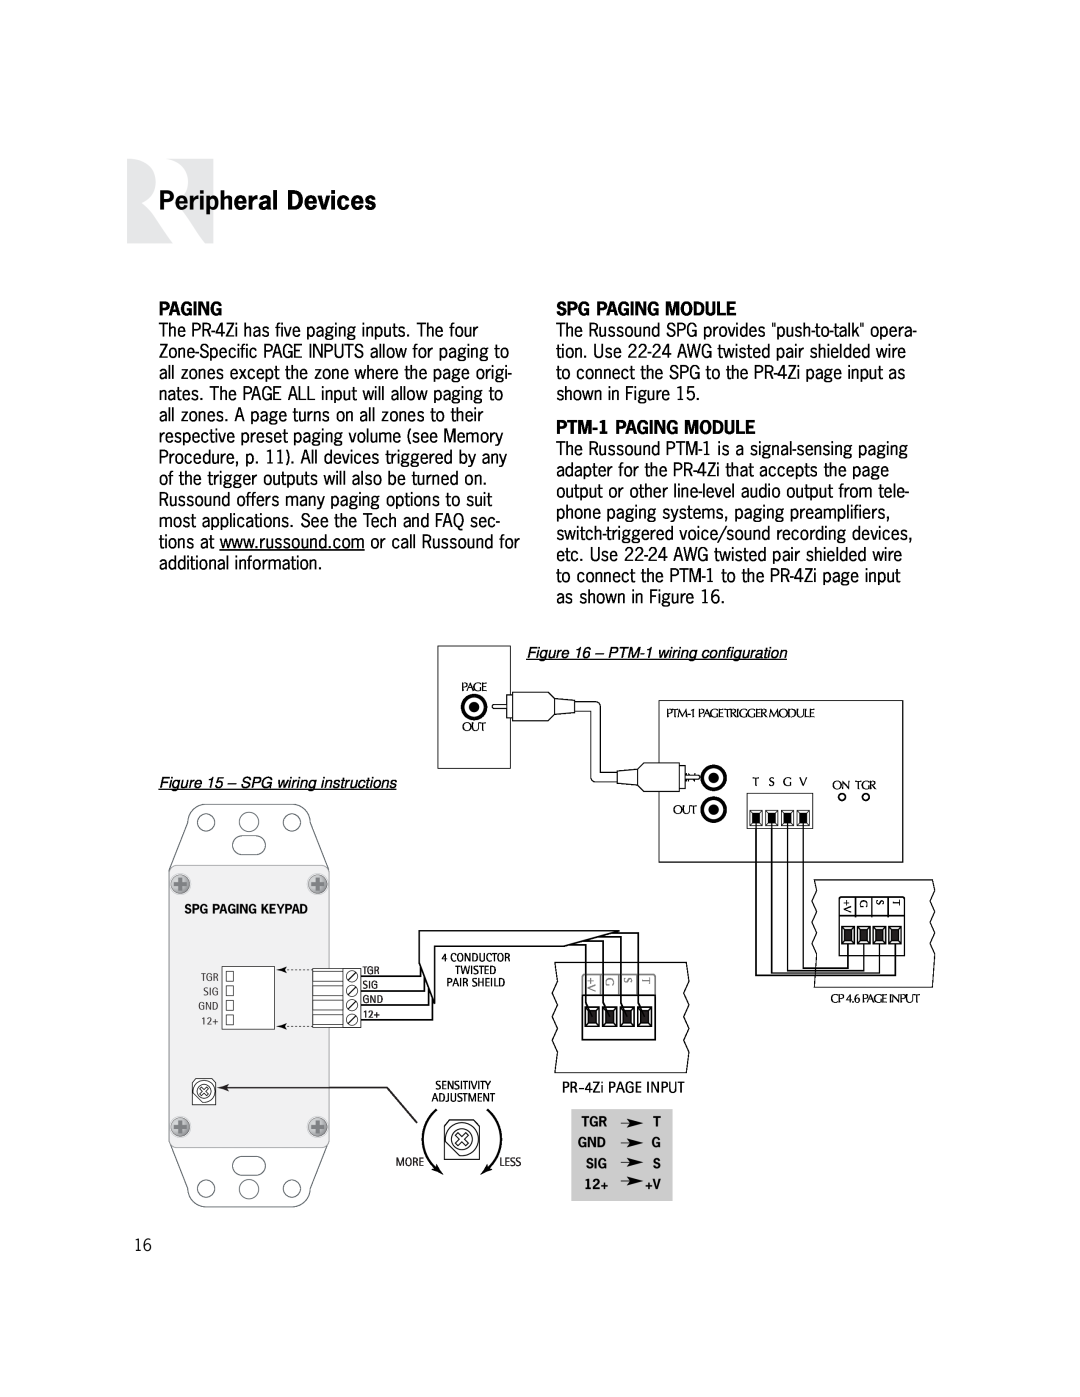 Russound PR-4Zi instruction manual Peripheral Devices, Spg Paging Module, PTM-1PAGING MODULE, SPG wiring instructions 